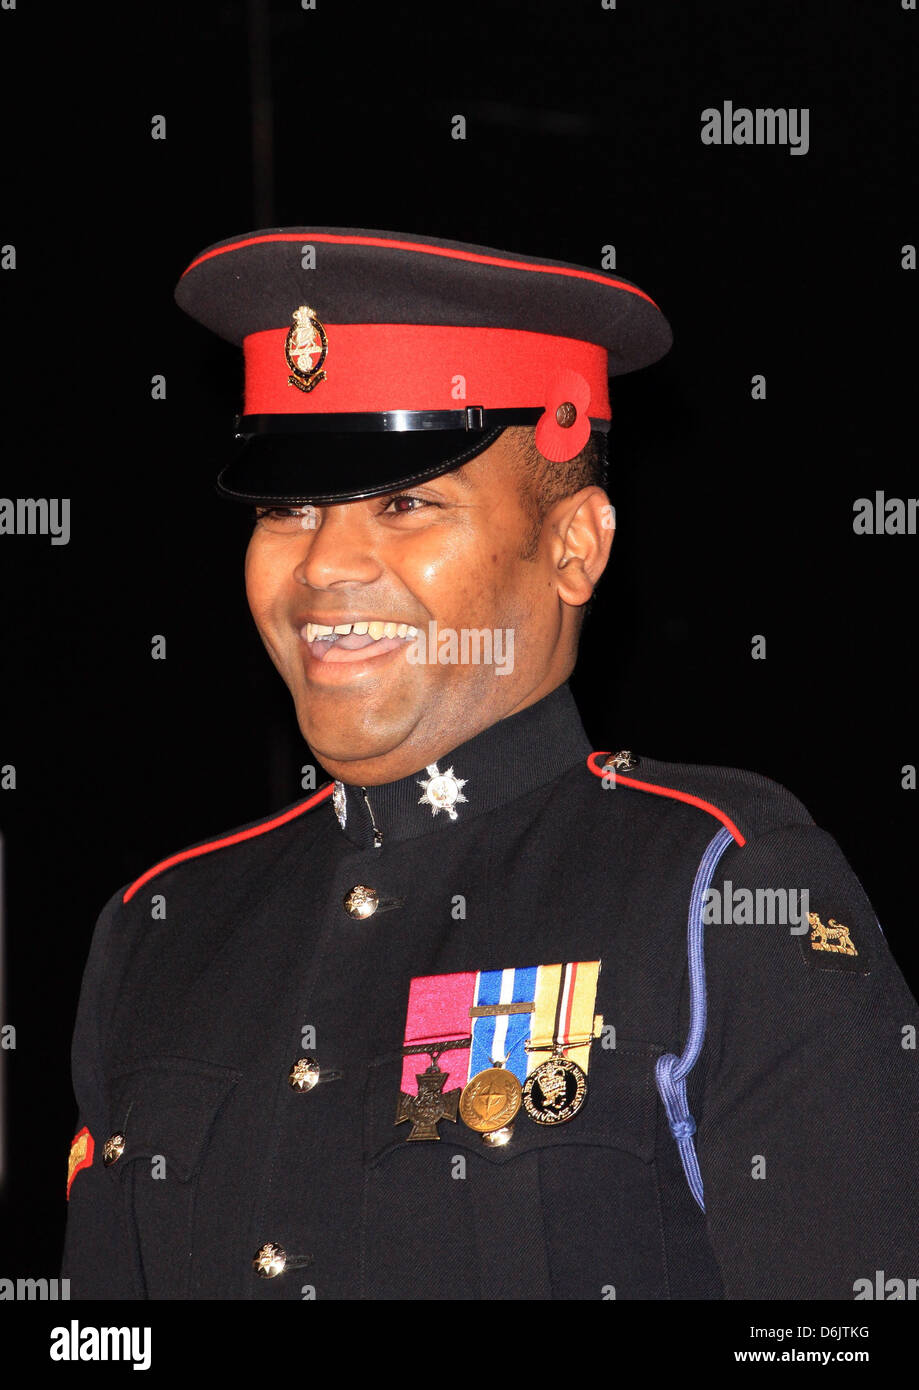 Lance Corporal Johnson Beharry VC Michael Jackson: The Life of an Icon UK film premiere held at the Empire cinema - Arrivals Stock Photo